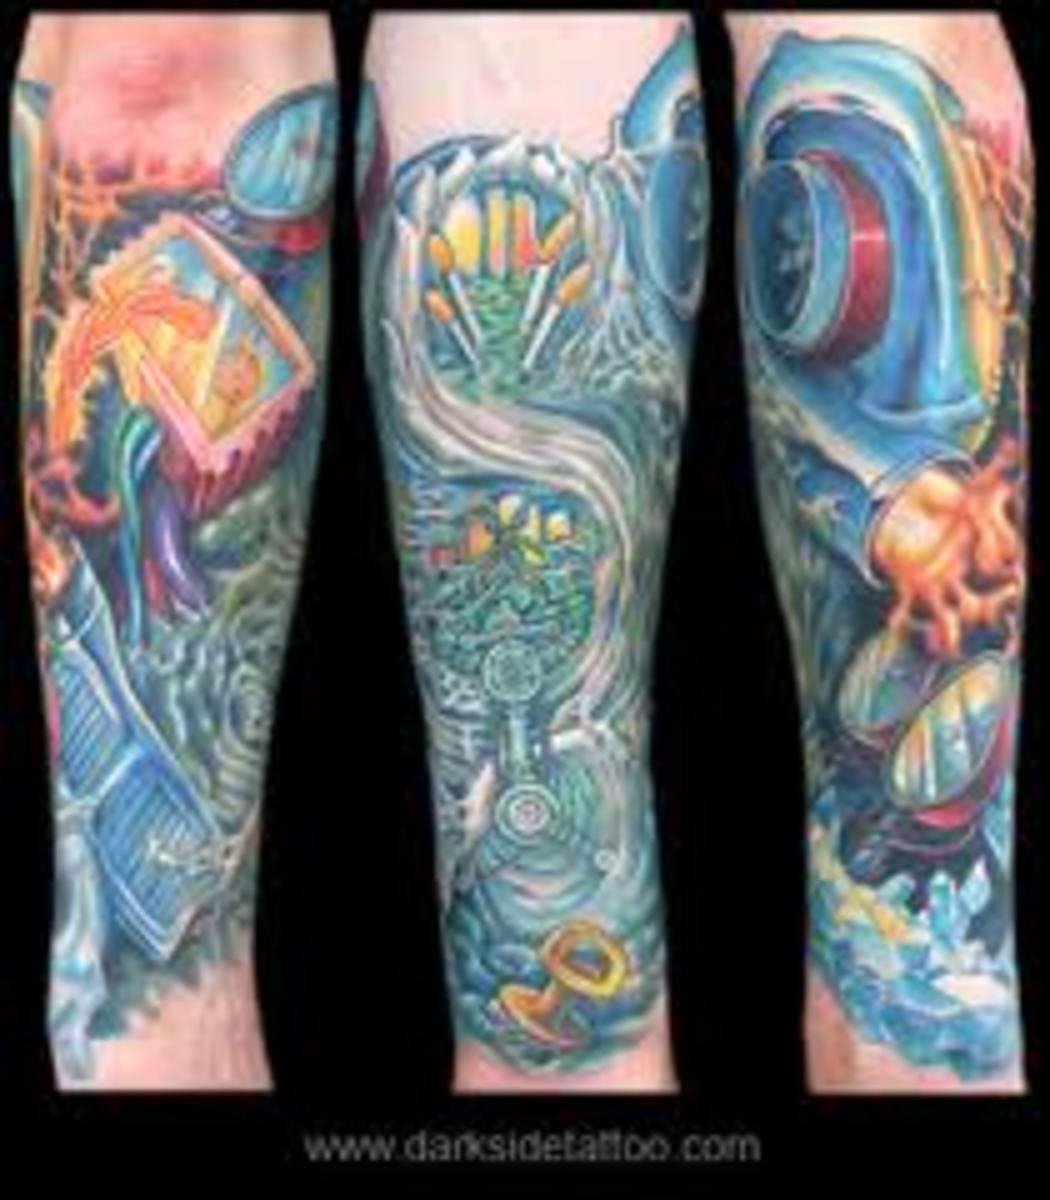 Engine Tattoos And Designs-Engine Tattoo Meanings And Ideas-Engine ...